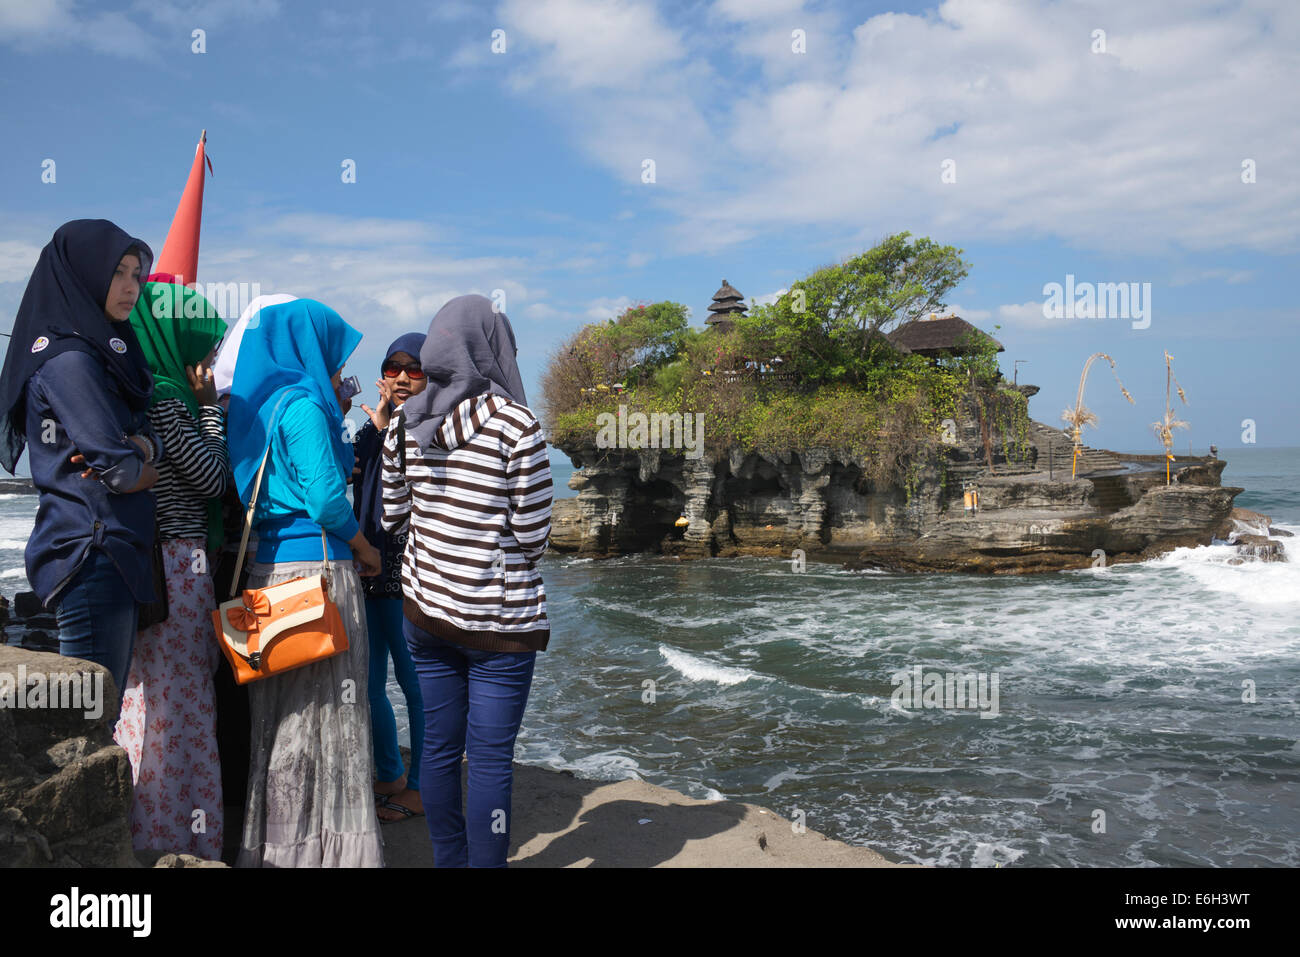 Group of girls visiting Tanah Lot Temple Bali Indonesia Stock Photo